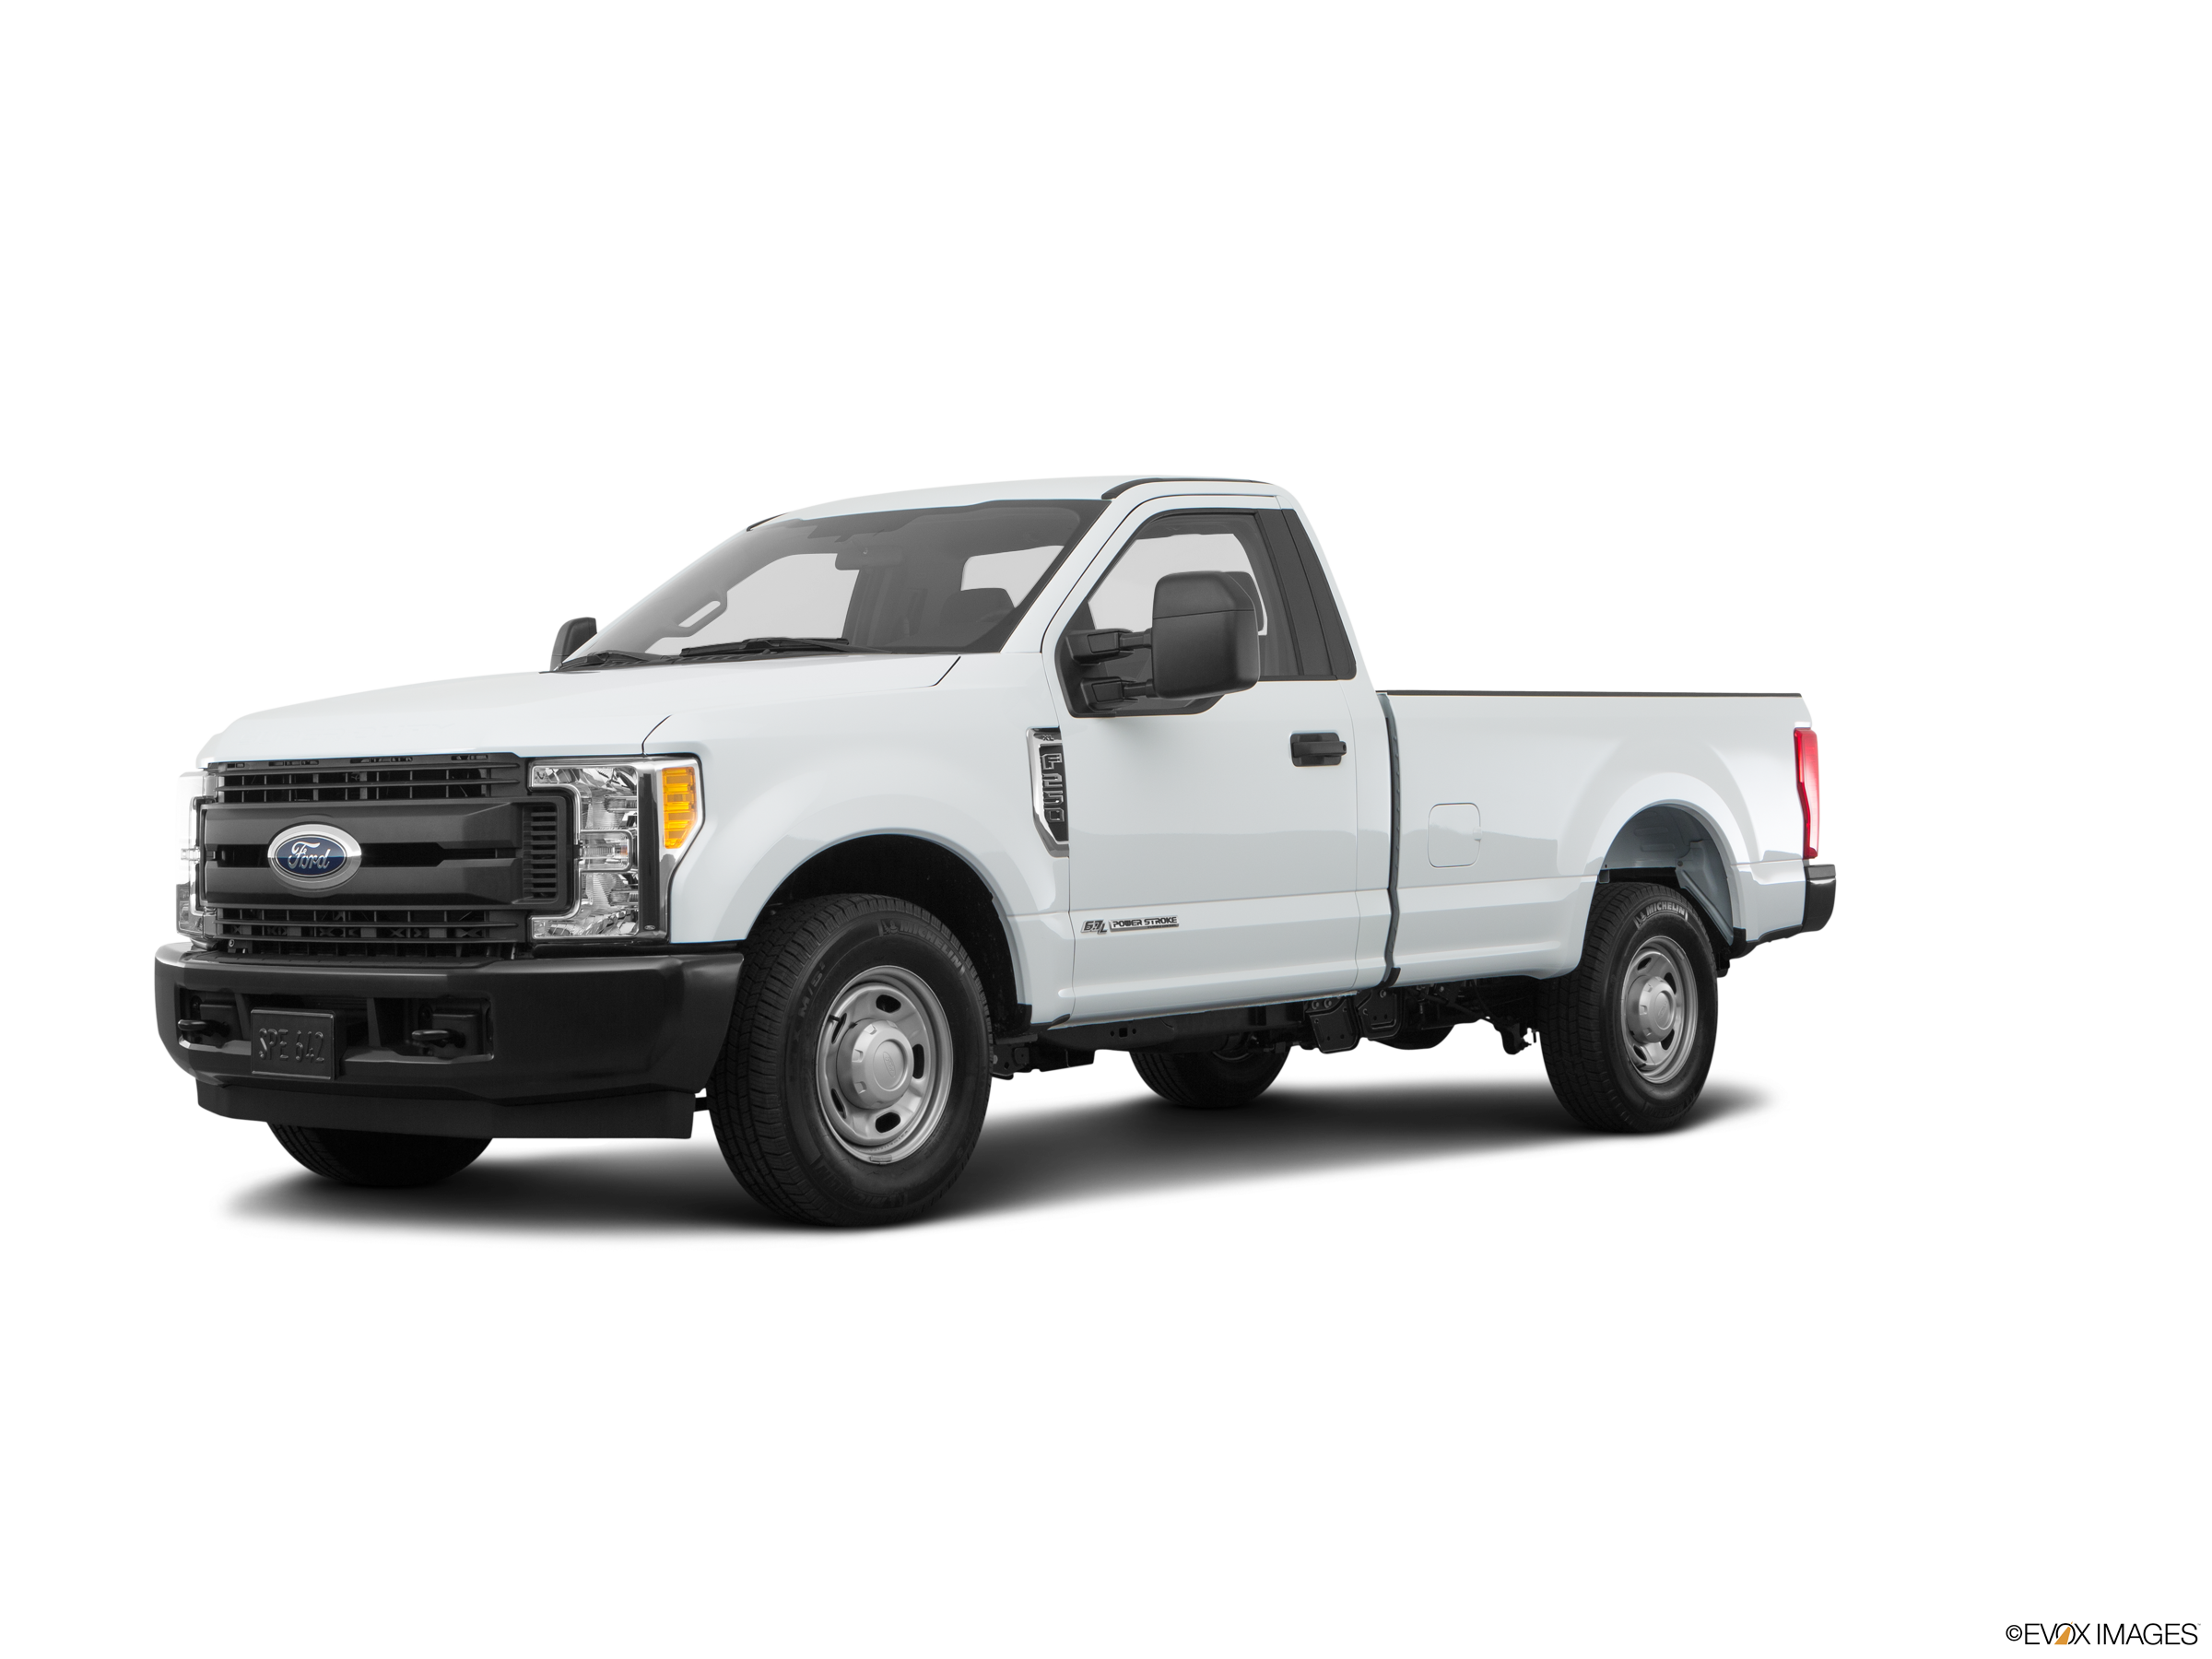 2017 Ford F250 Price, Value, Ratings & Reviews | Kelley Blue Book